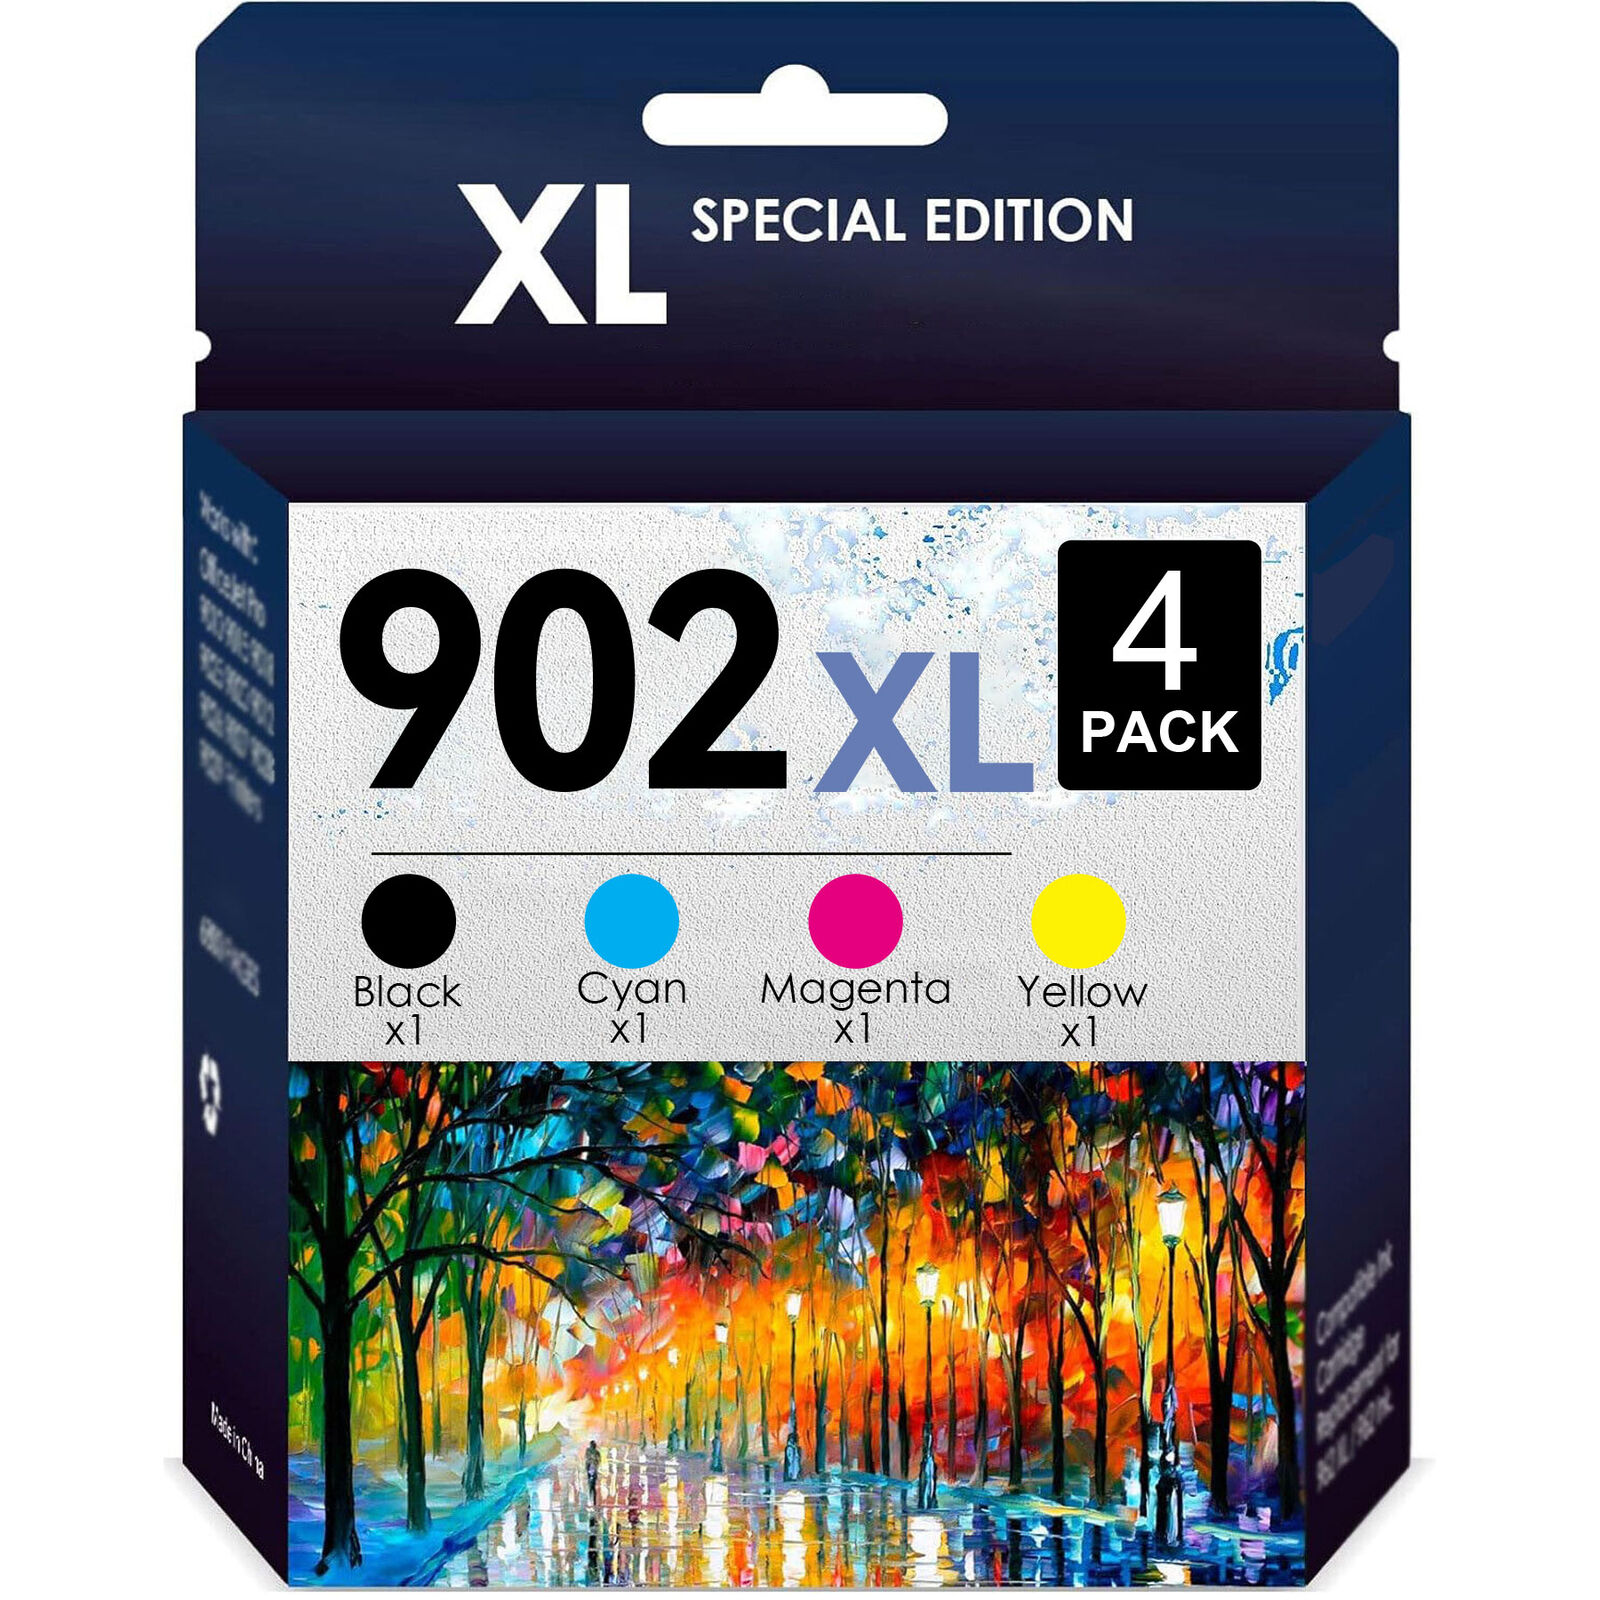 4 Pack 902XL 902 Ink Cartridge for HP Officejet Pro 6978 6960 6968 6970 6975